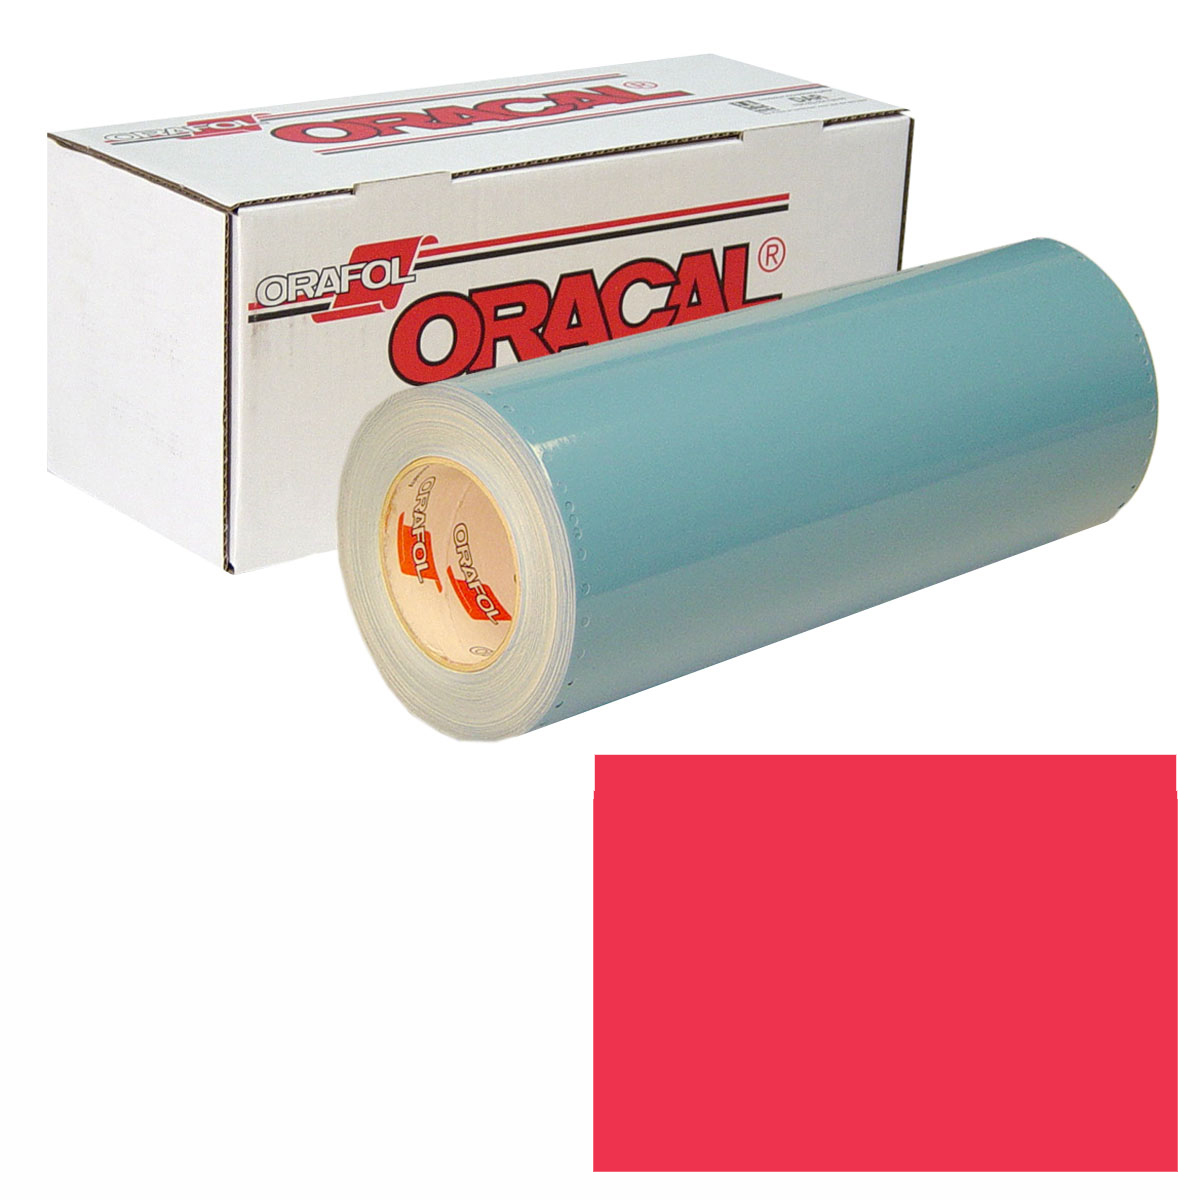 ORACAL 751 30in X 10yd 324 Blood Red